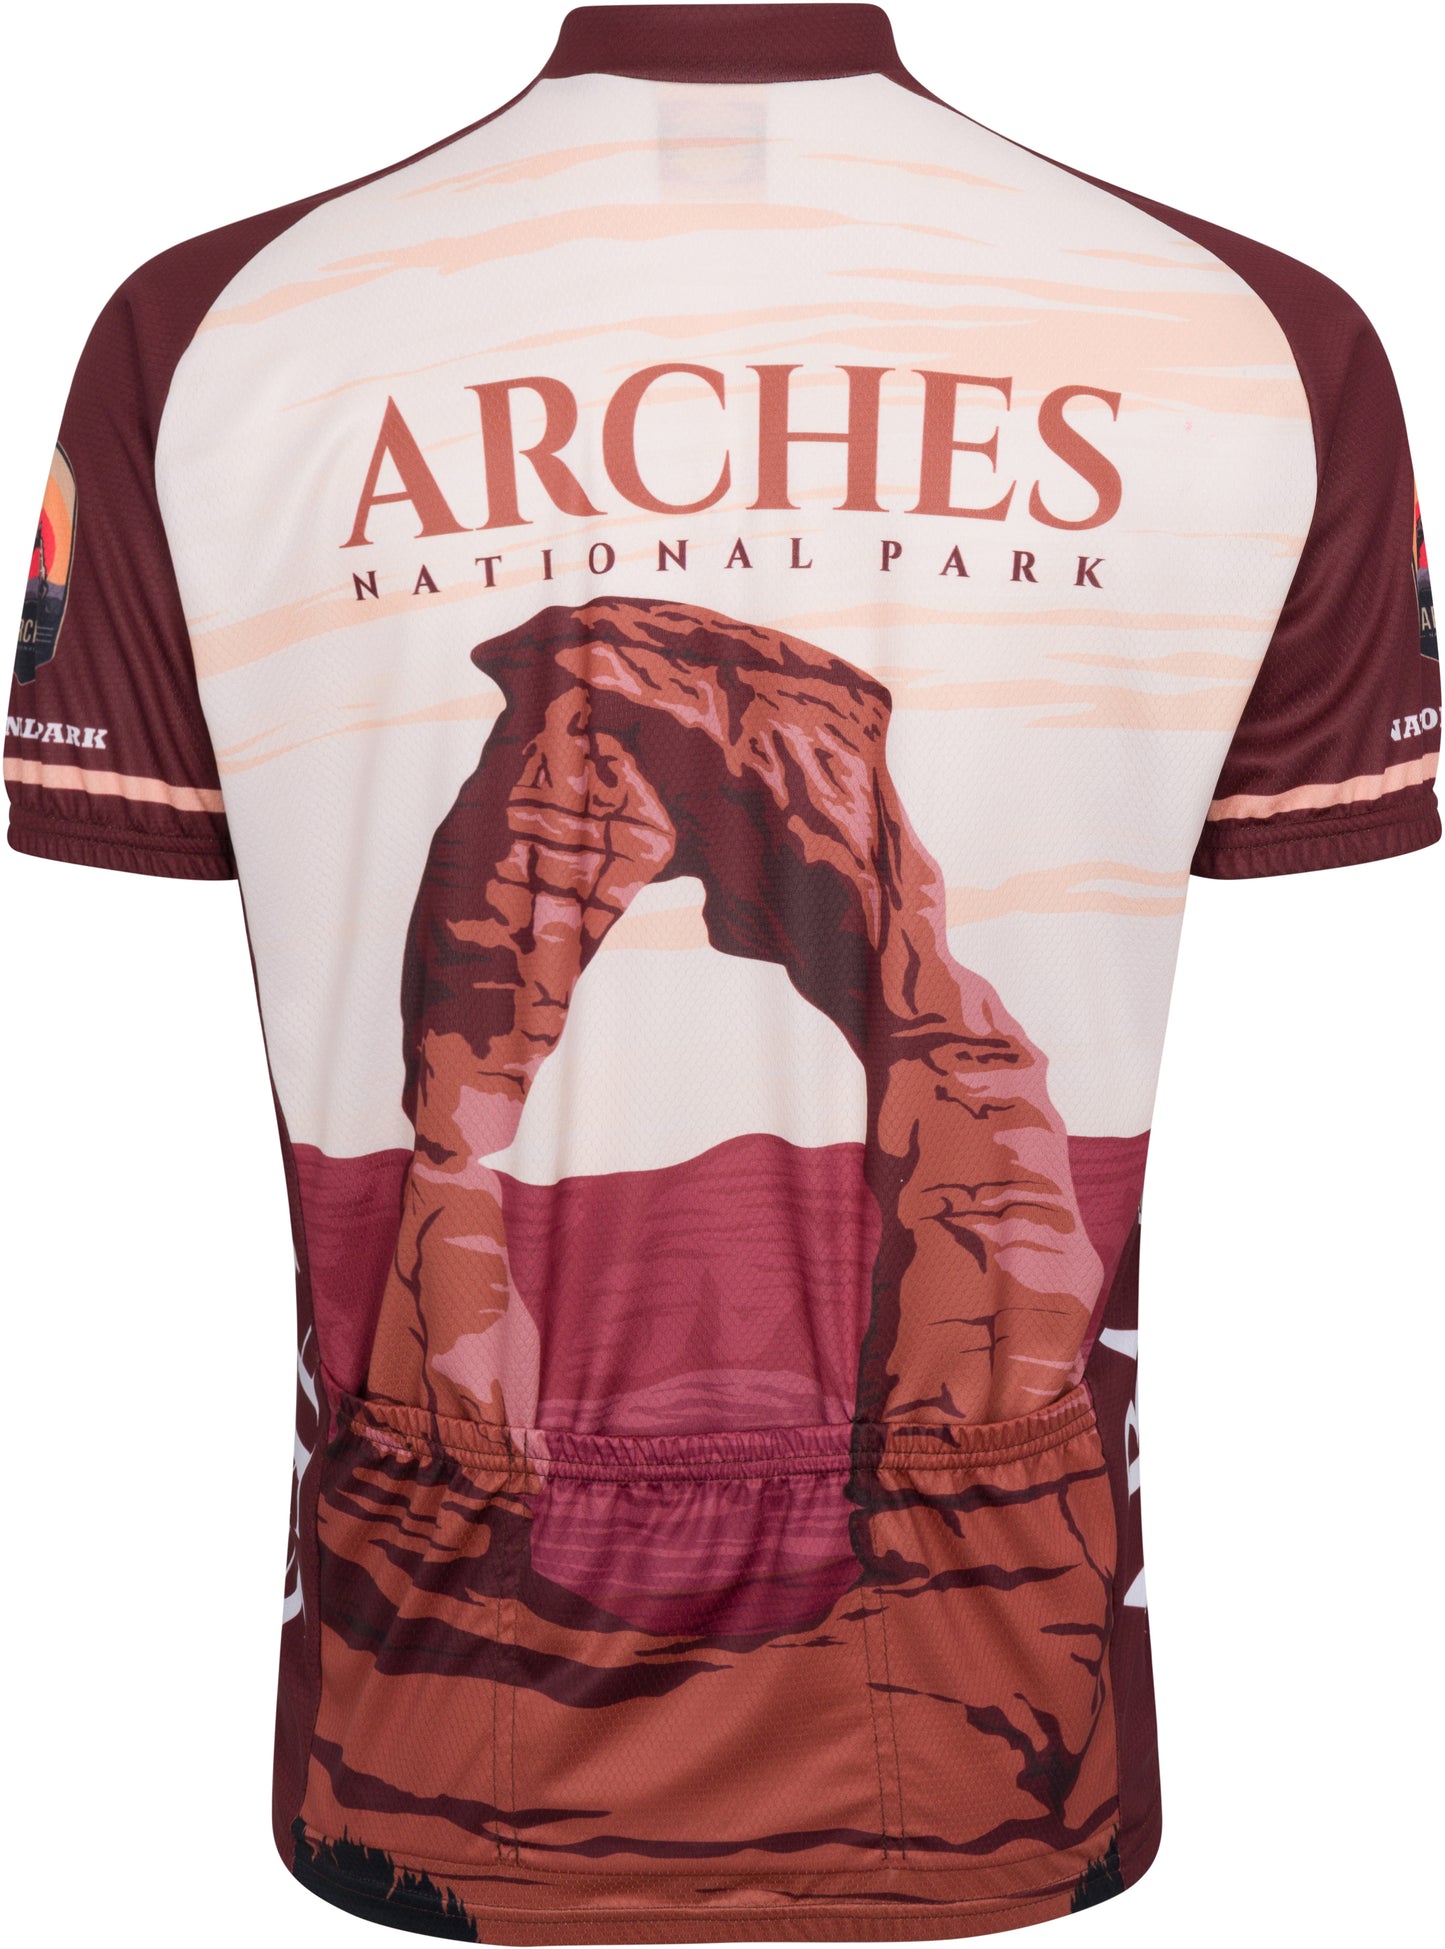 2024 Arches National Park Men's Cycling Jersey